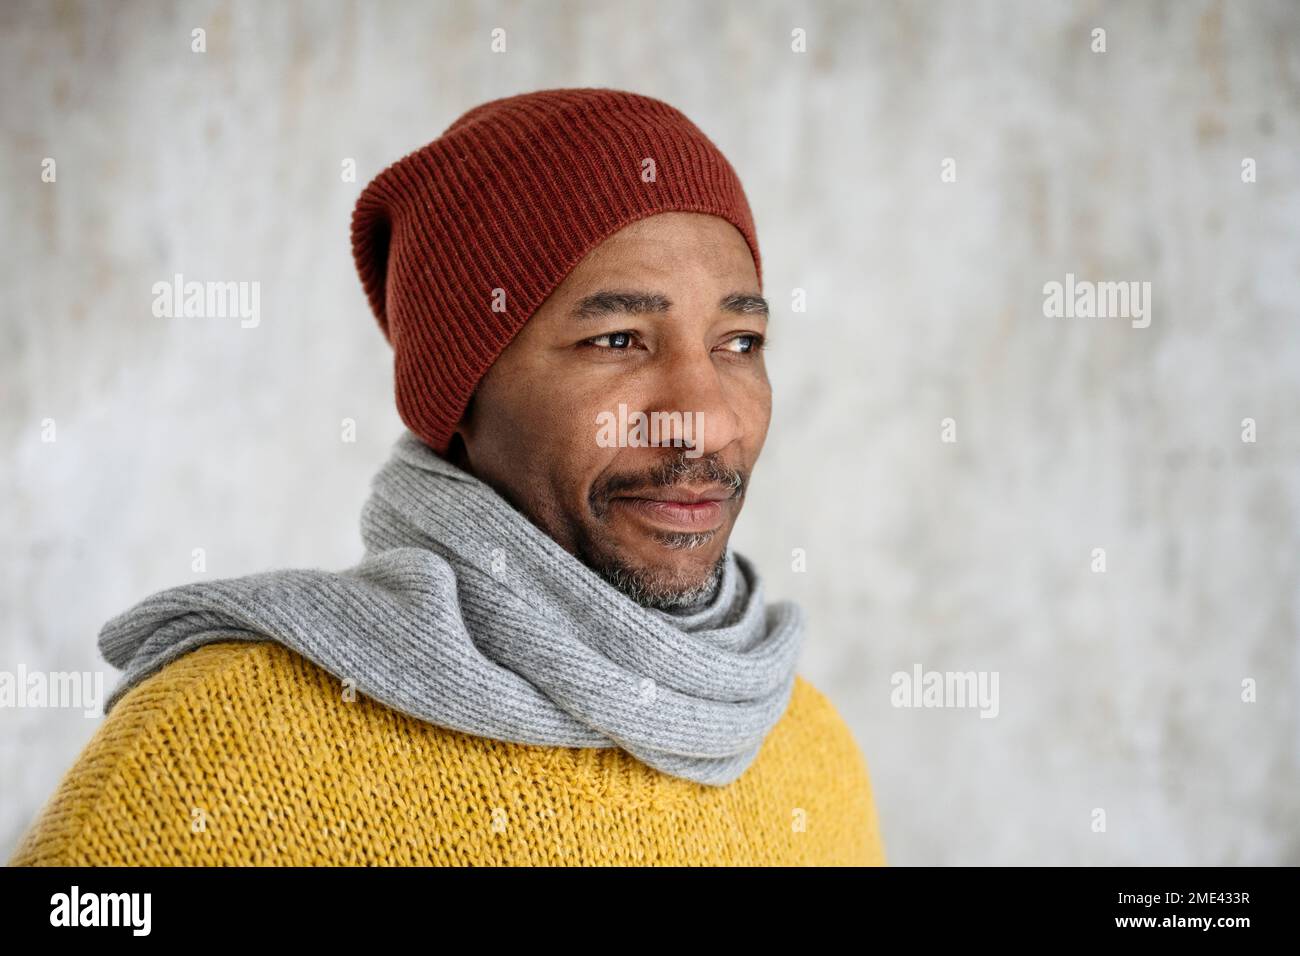 Mature man wearing scarf and knit hat Stock Photo